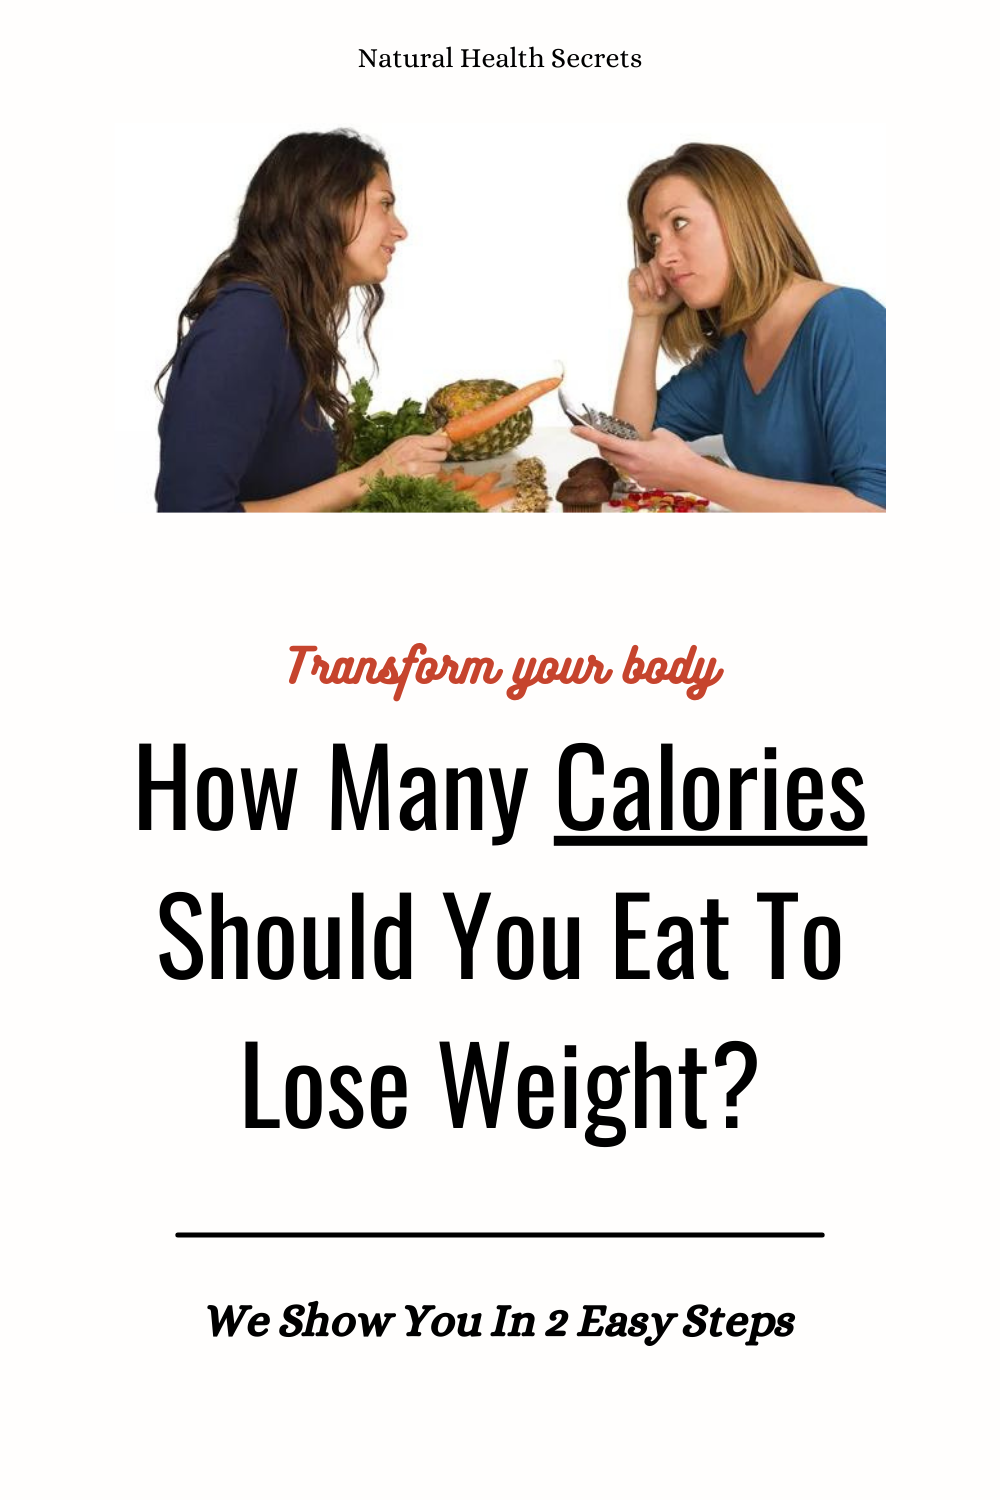 Two women deciding how many calories to eat to lose weight.